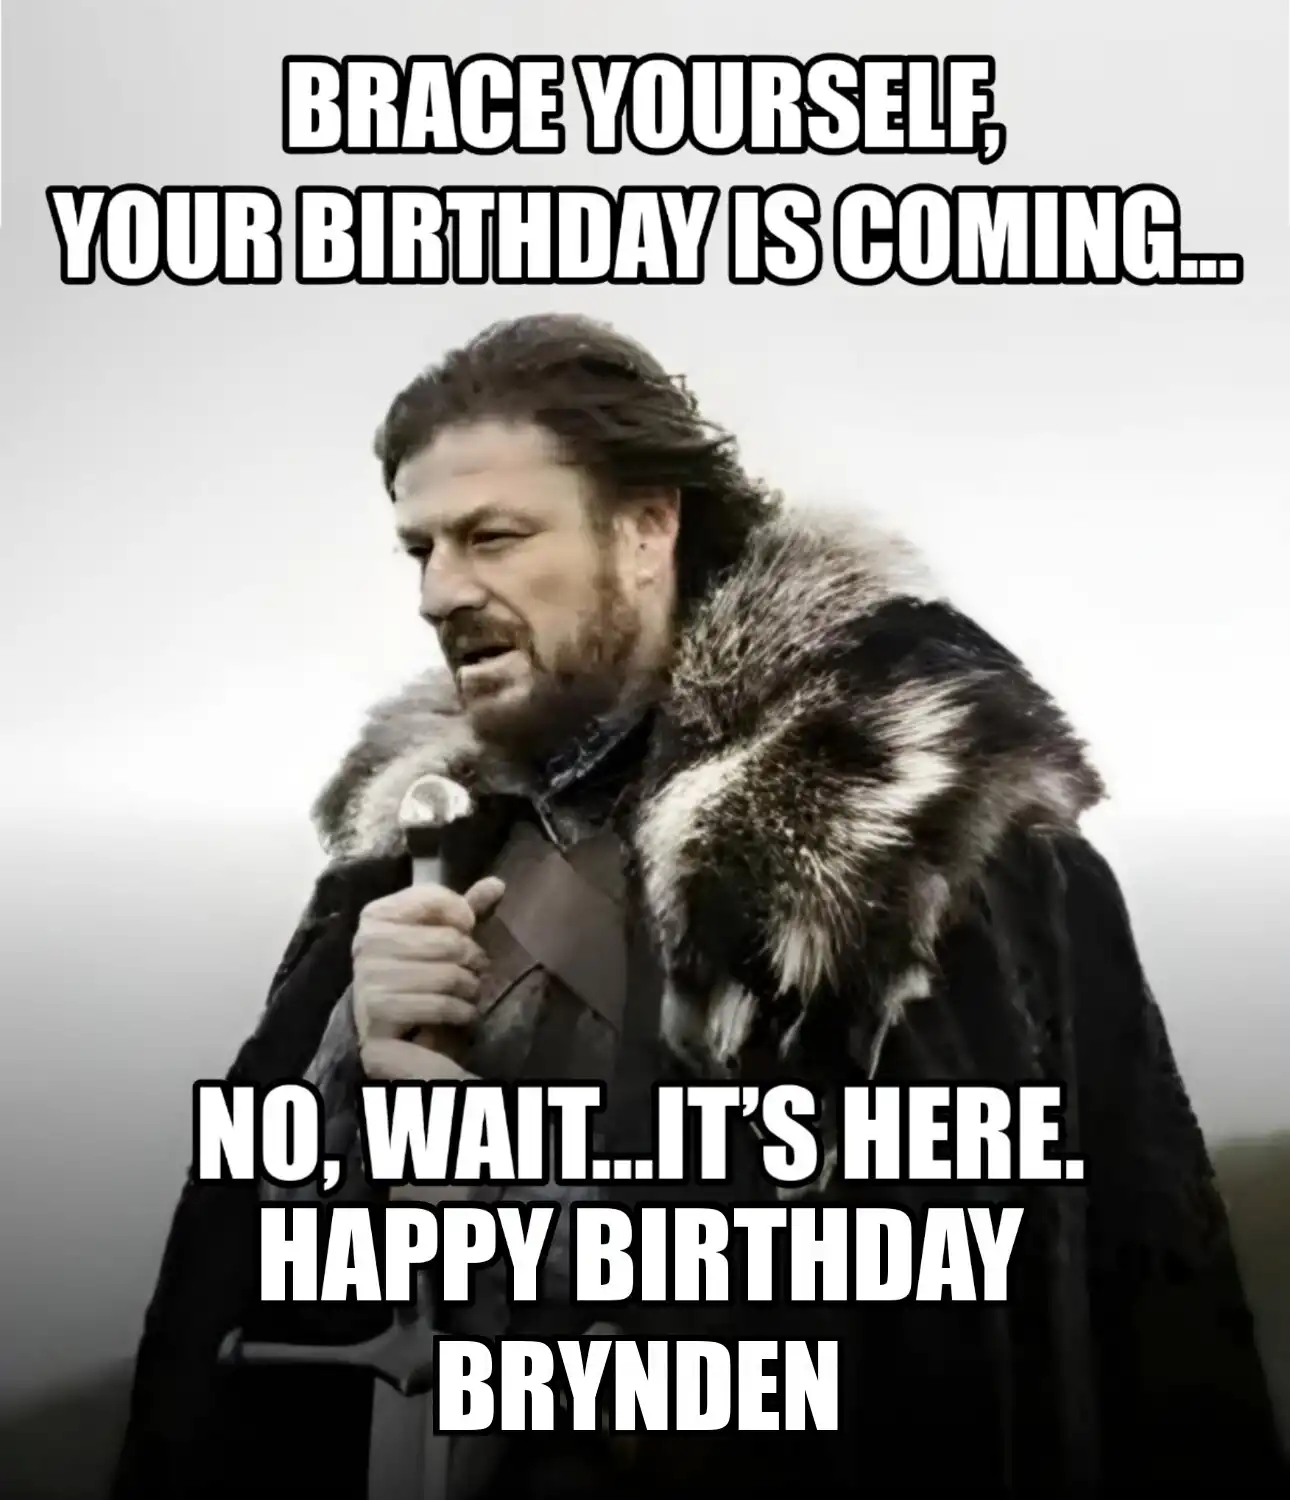 Happy Birthday Brynden Brace Yourself Your Birthday Is Coming Meme